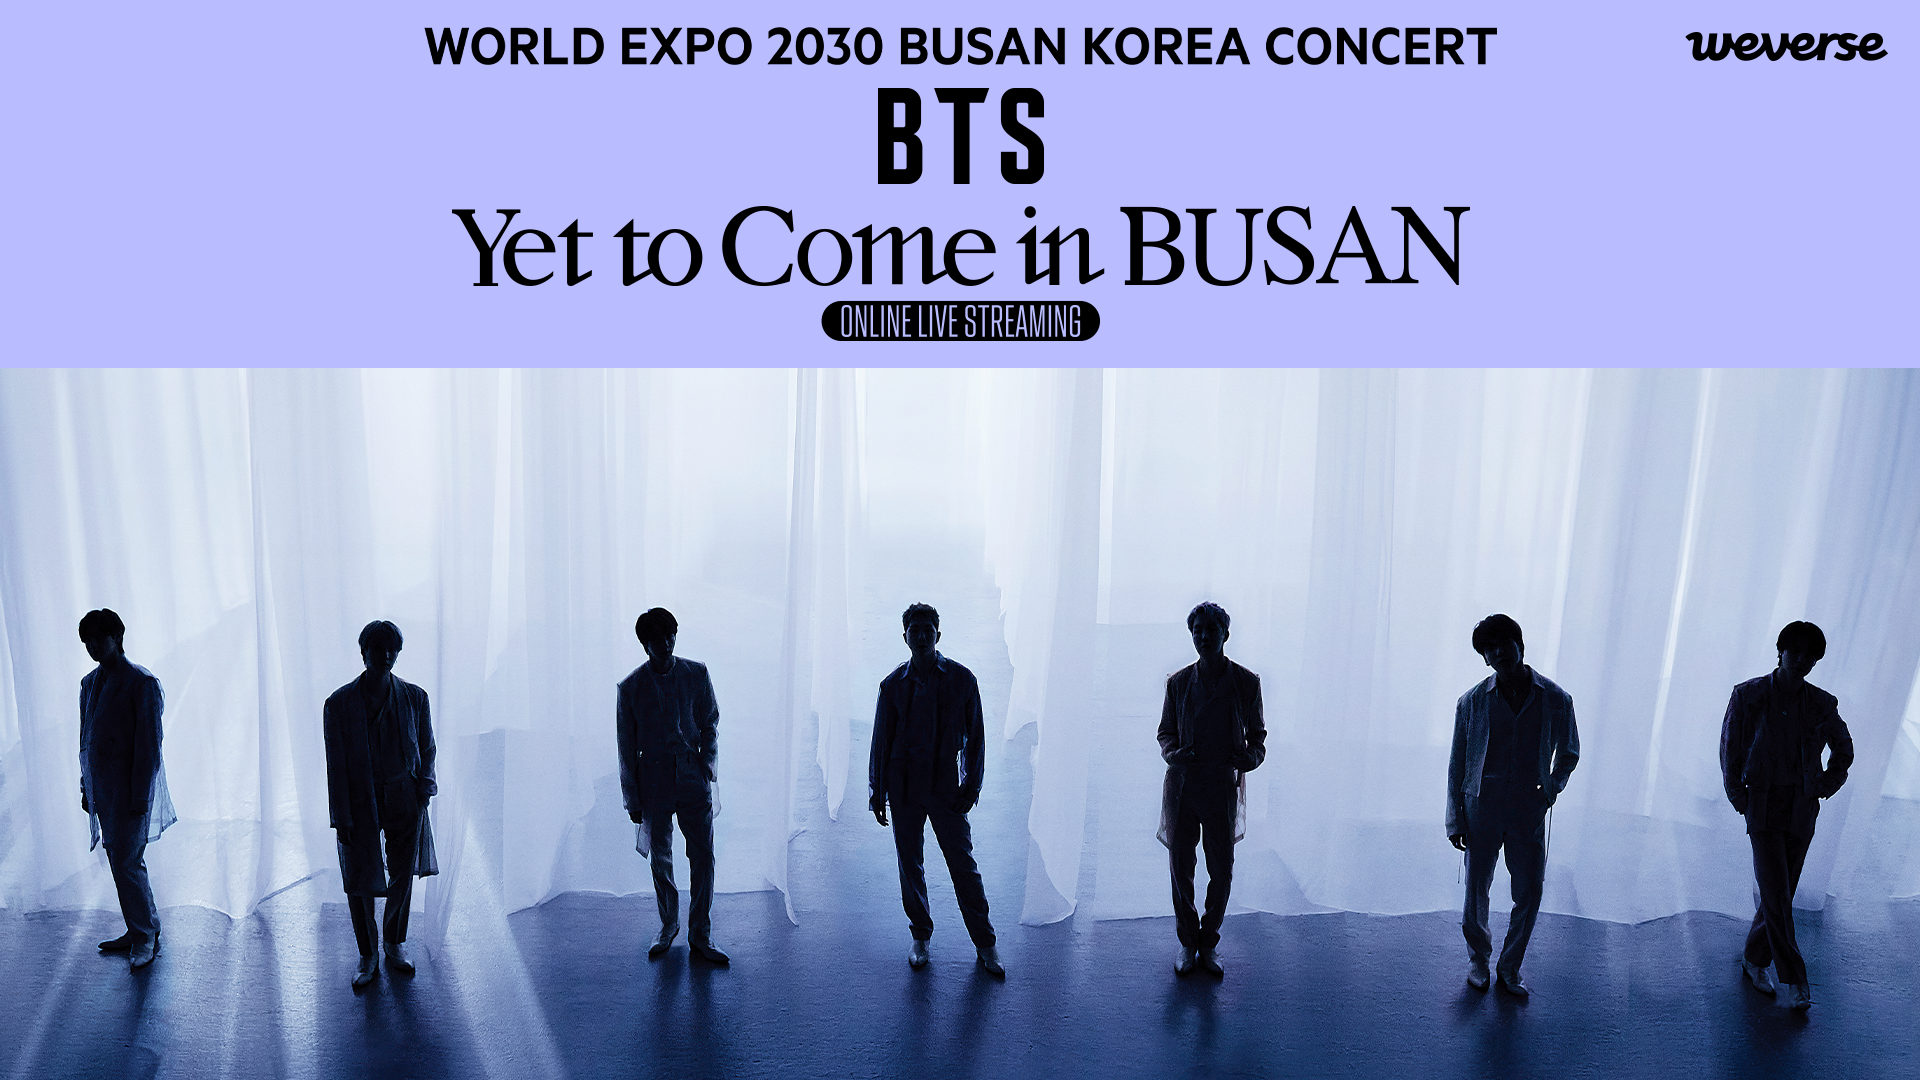 2030 BUSAN WORLD EXPO CONCERT BTS <Yet To Come> in BUSAN - ONLINE LIVE STREAMING VIDEO 0